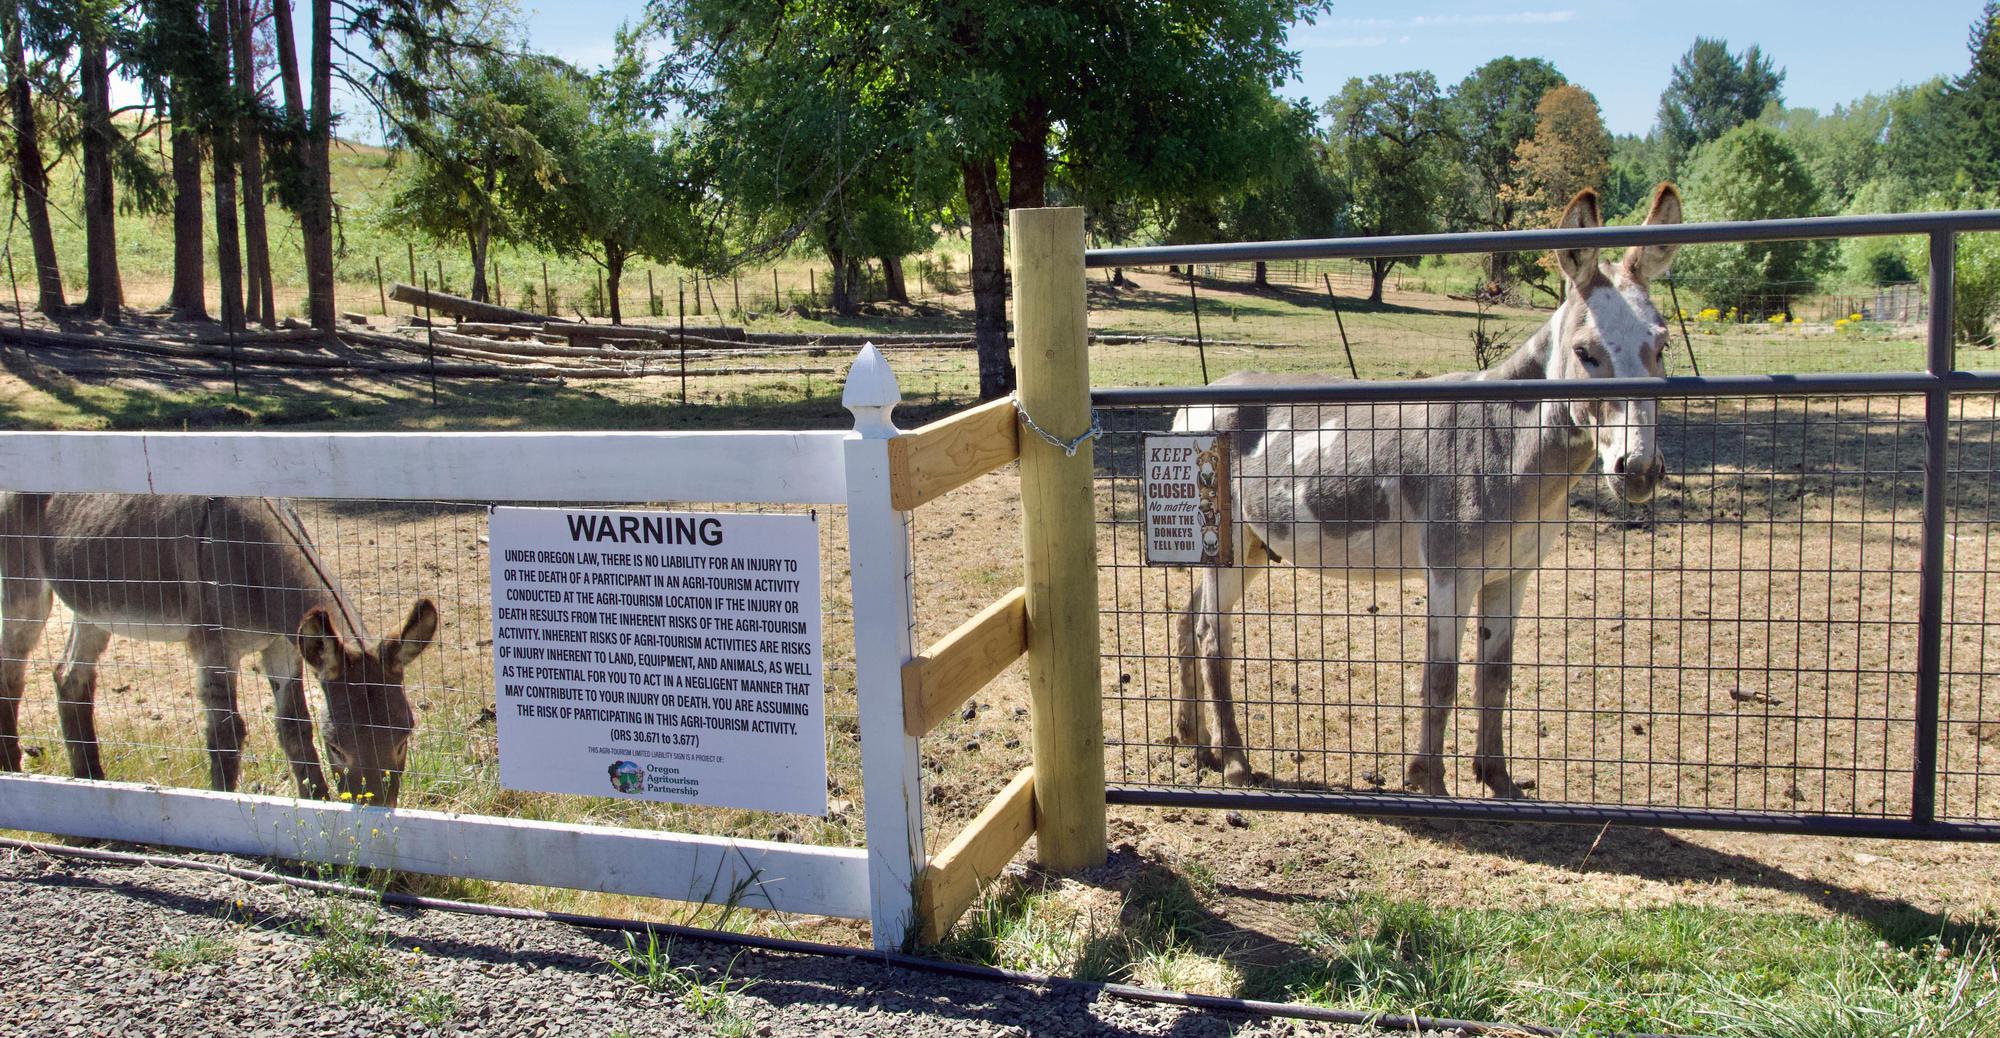 Two donkeys in a fenced pasture. Fence bears a warning sign.